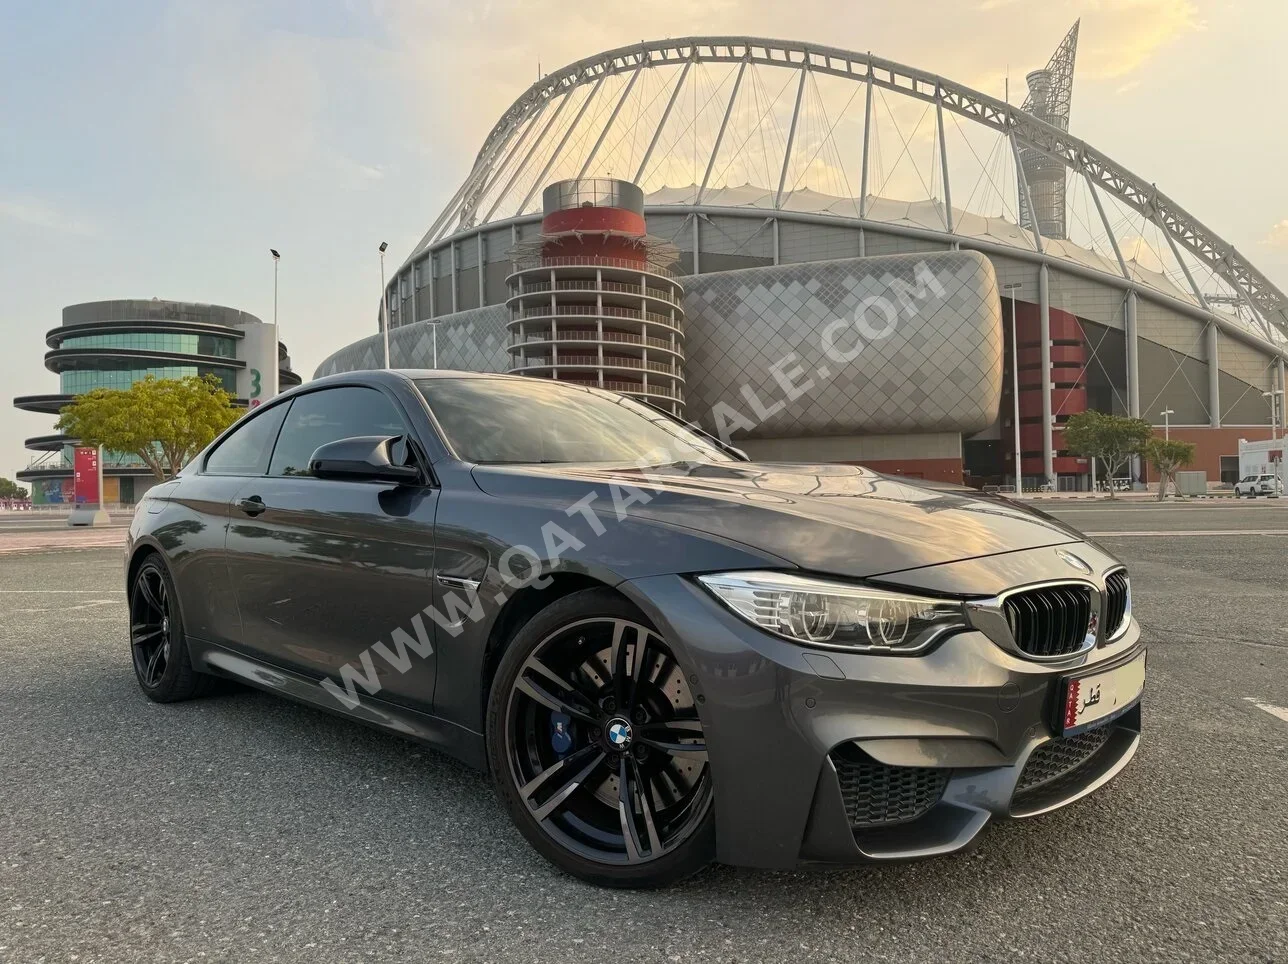 BMW  M-Series  4  2016  Automatic  44,000 Km  6 Cylinder  Rear Wheel Drive (RWD)  Coupe / Sport  Gray  With Warranty